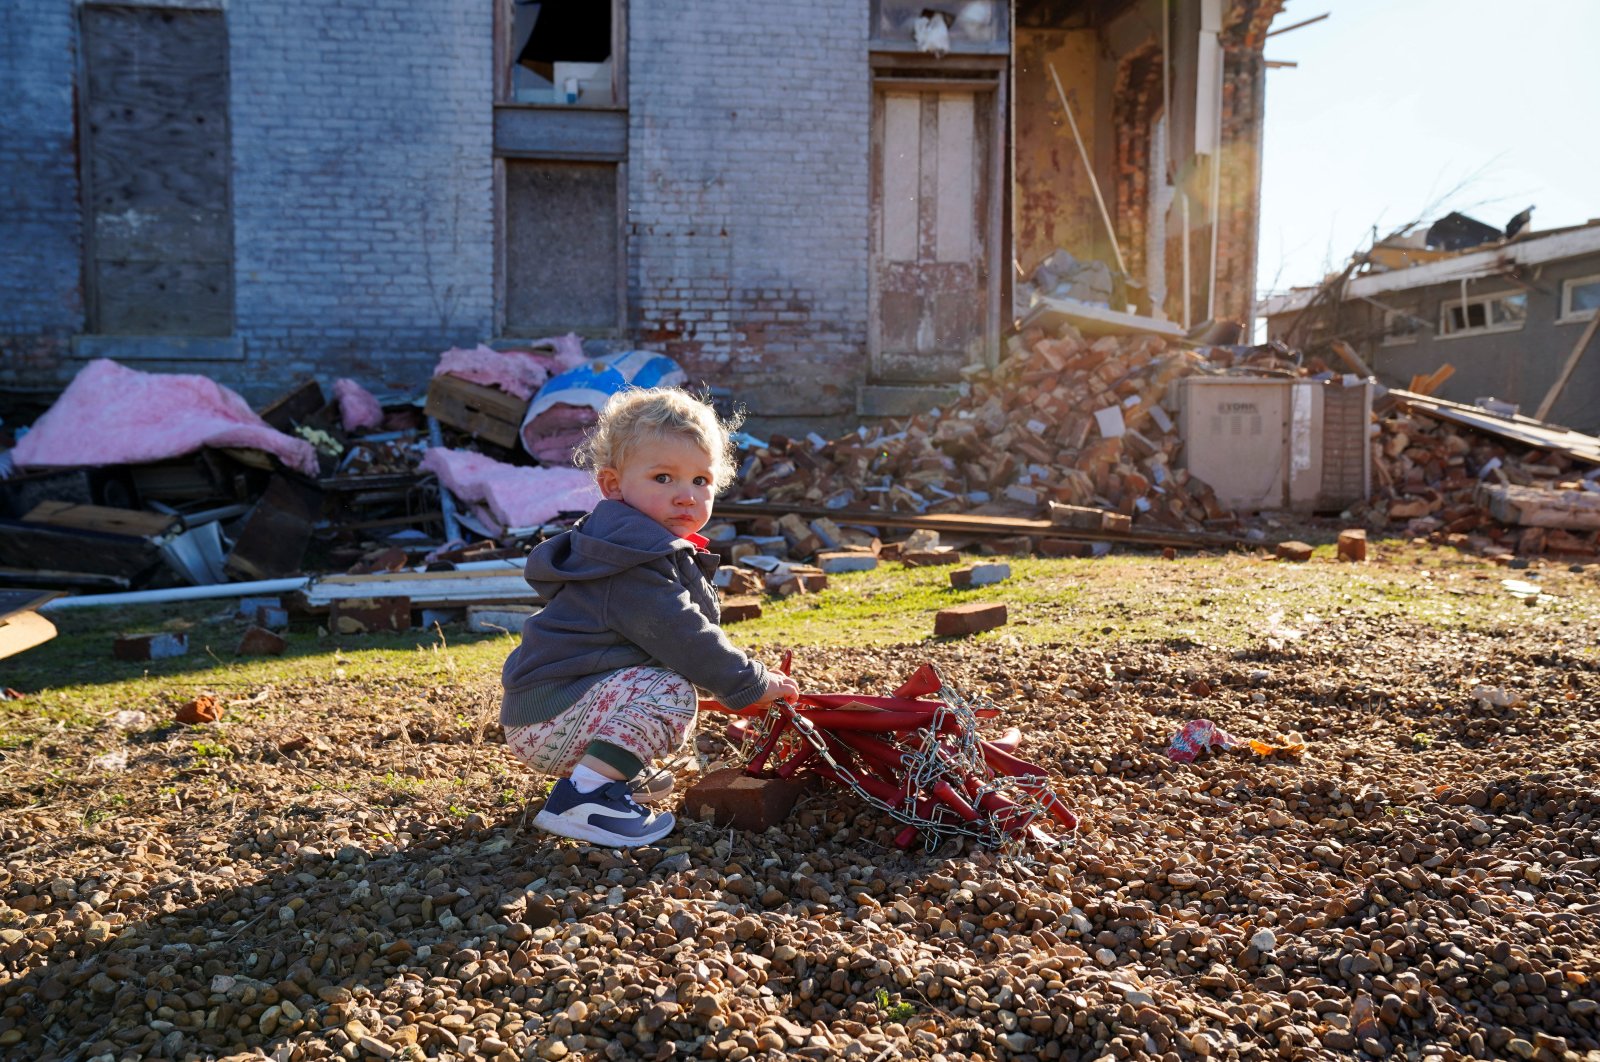 Gus Hart, 1, plays outside the home the Hart family had been renovating, with plans to move into, after a devastating outbreak of tornadoes ripped through several U.S. states in Mayfield, Kentucky, U.S., Dec. 12, 2021. (Reuters Photo)